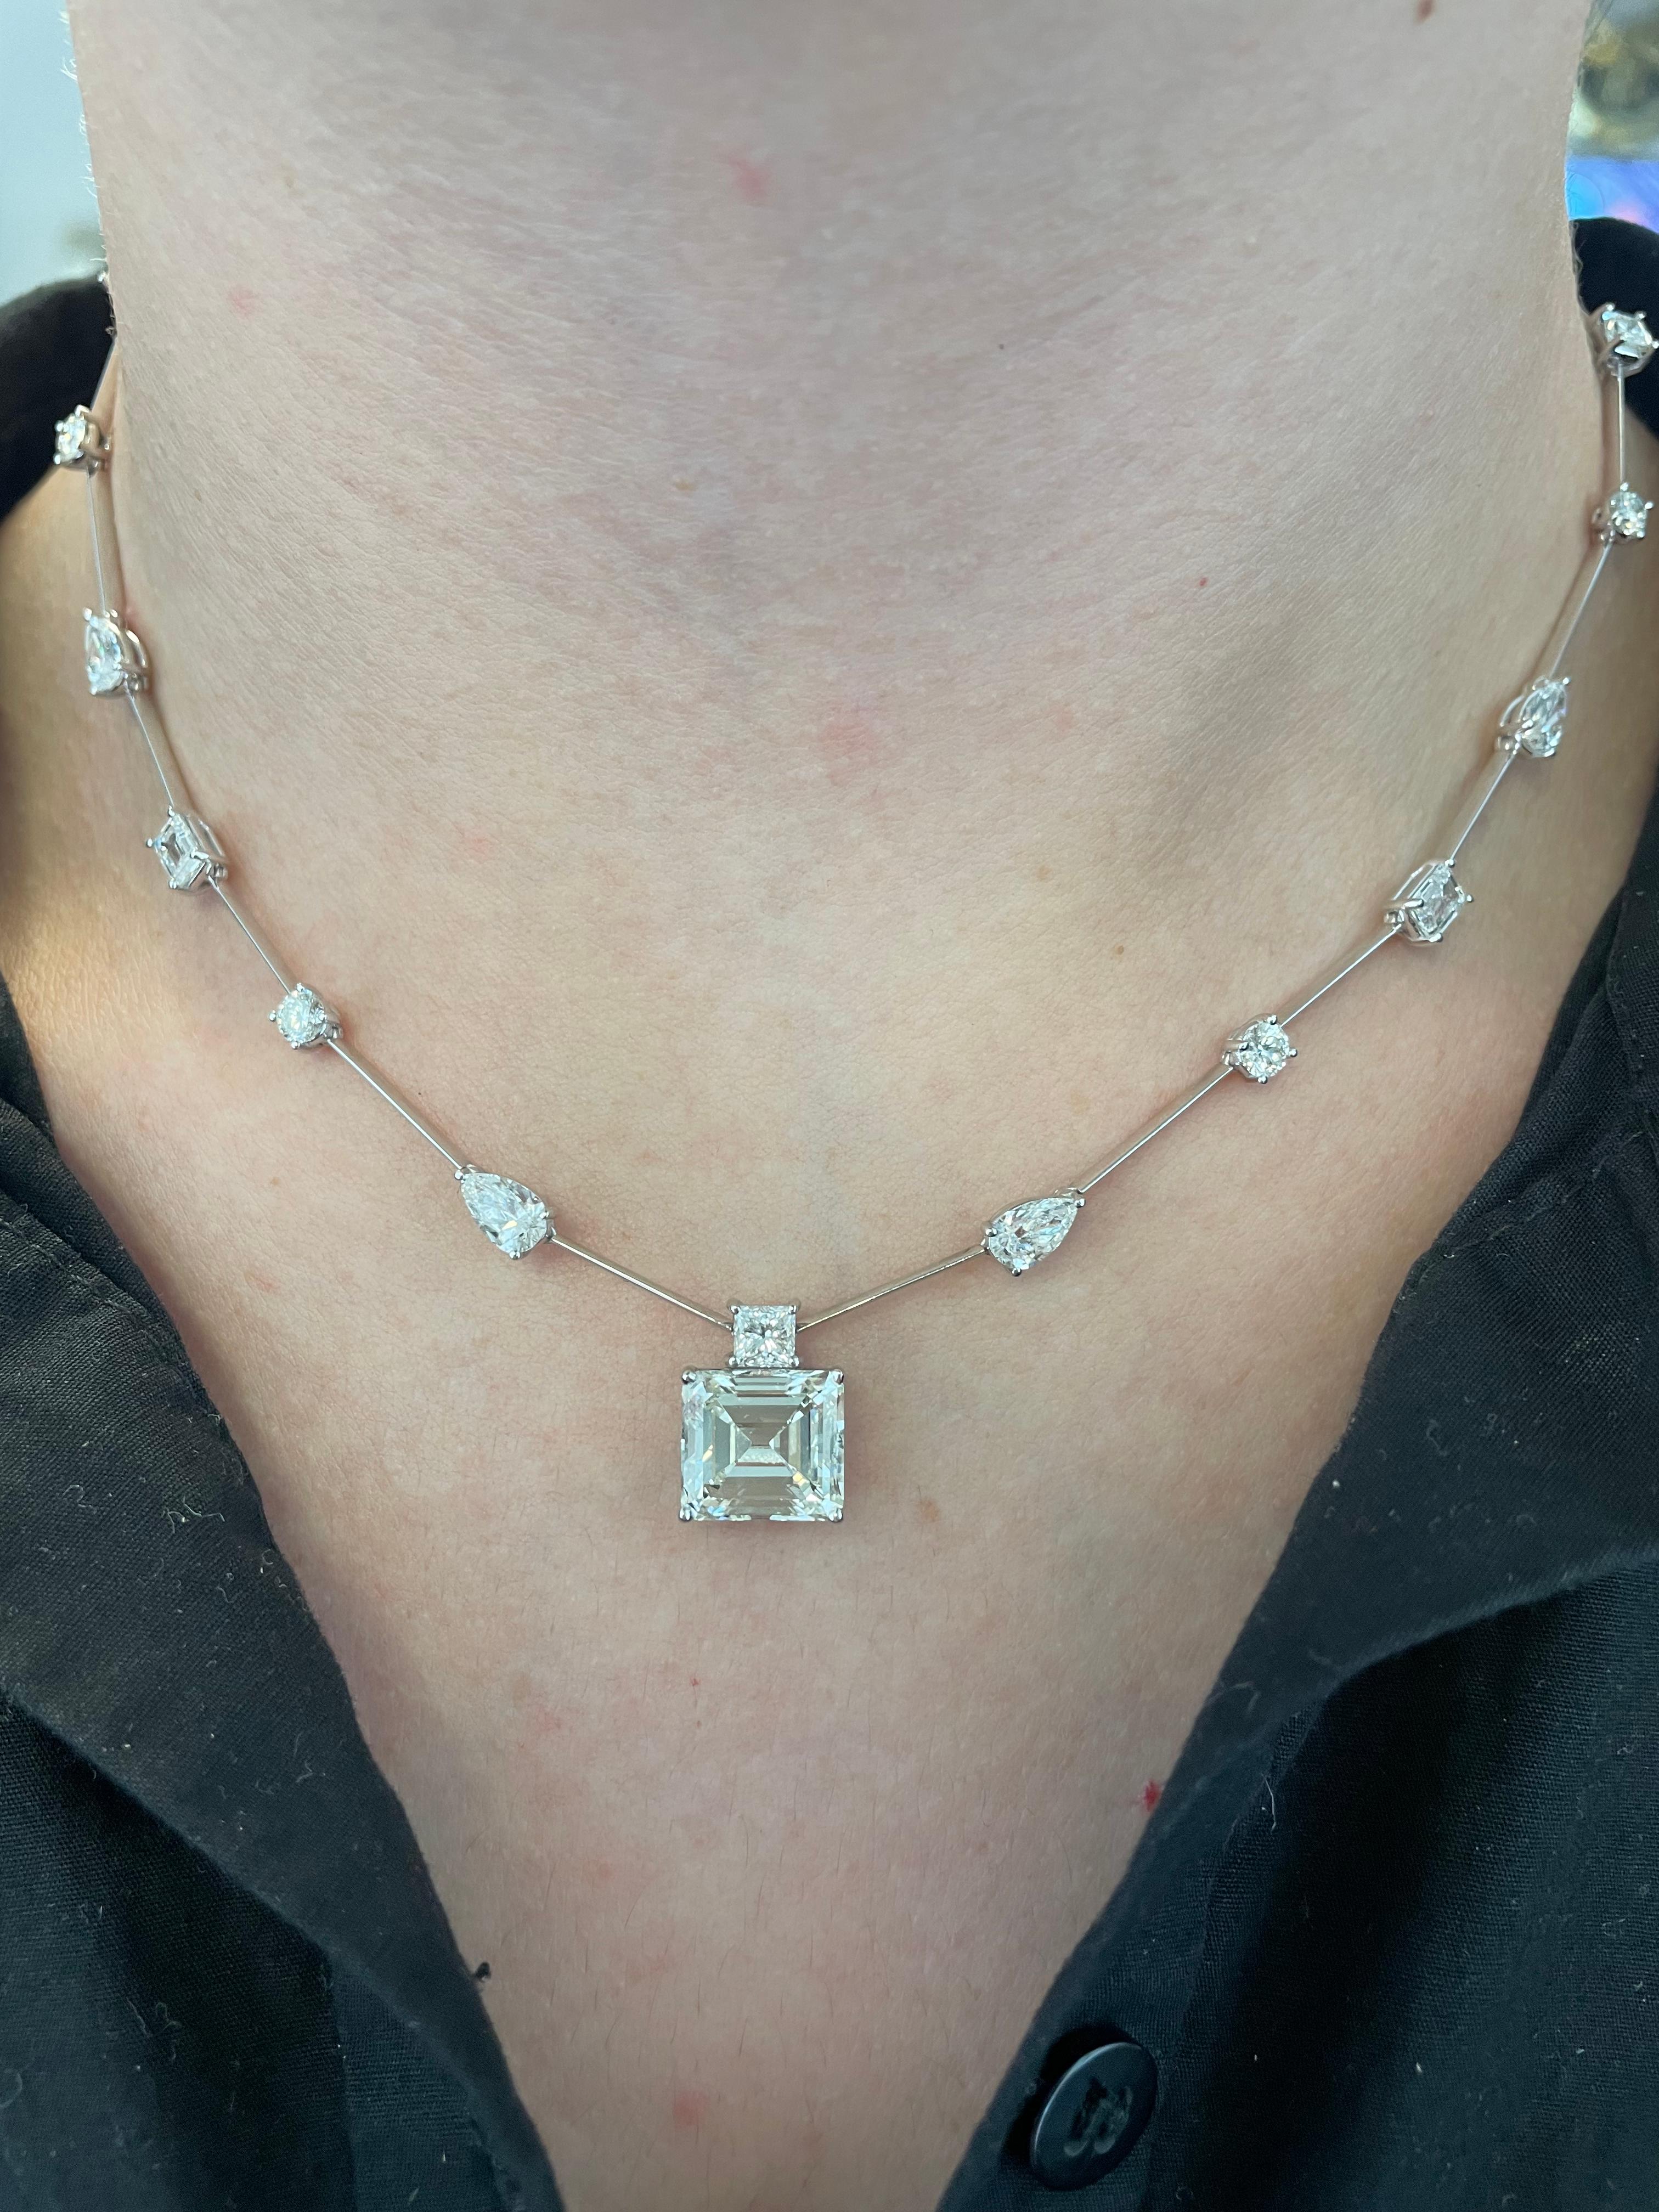 Alexander GIA 5.54ct Square Emerald Cut Diamond Necklace with Diamonds 18k Gold In New Condition For Sale In BEVERLY HILLS, CA